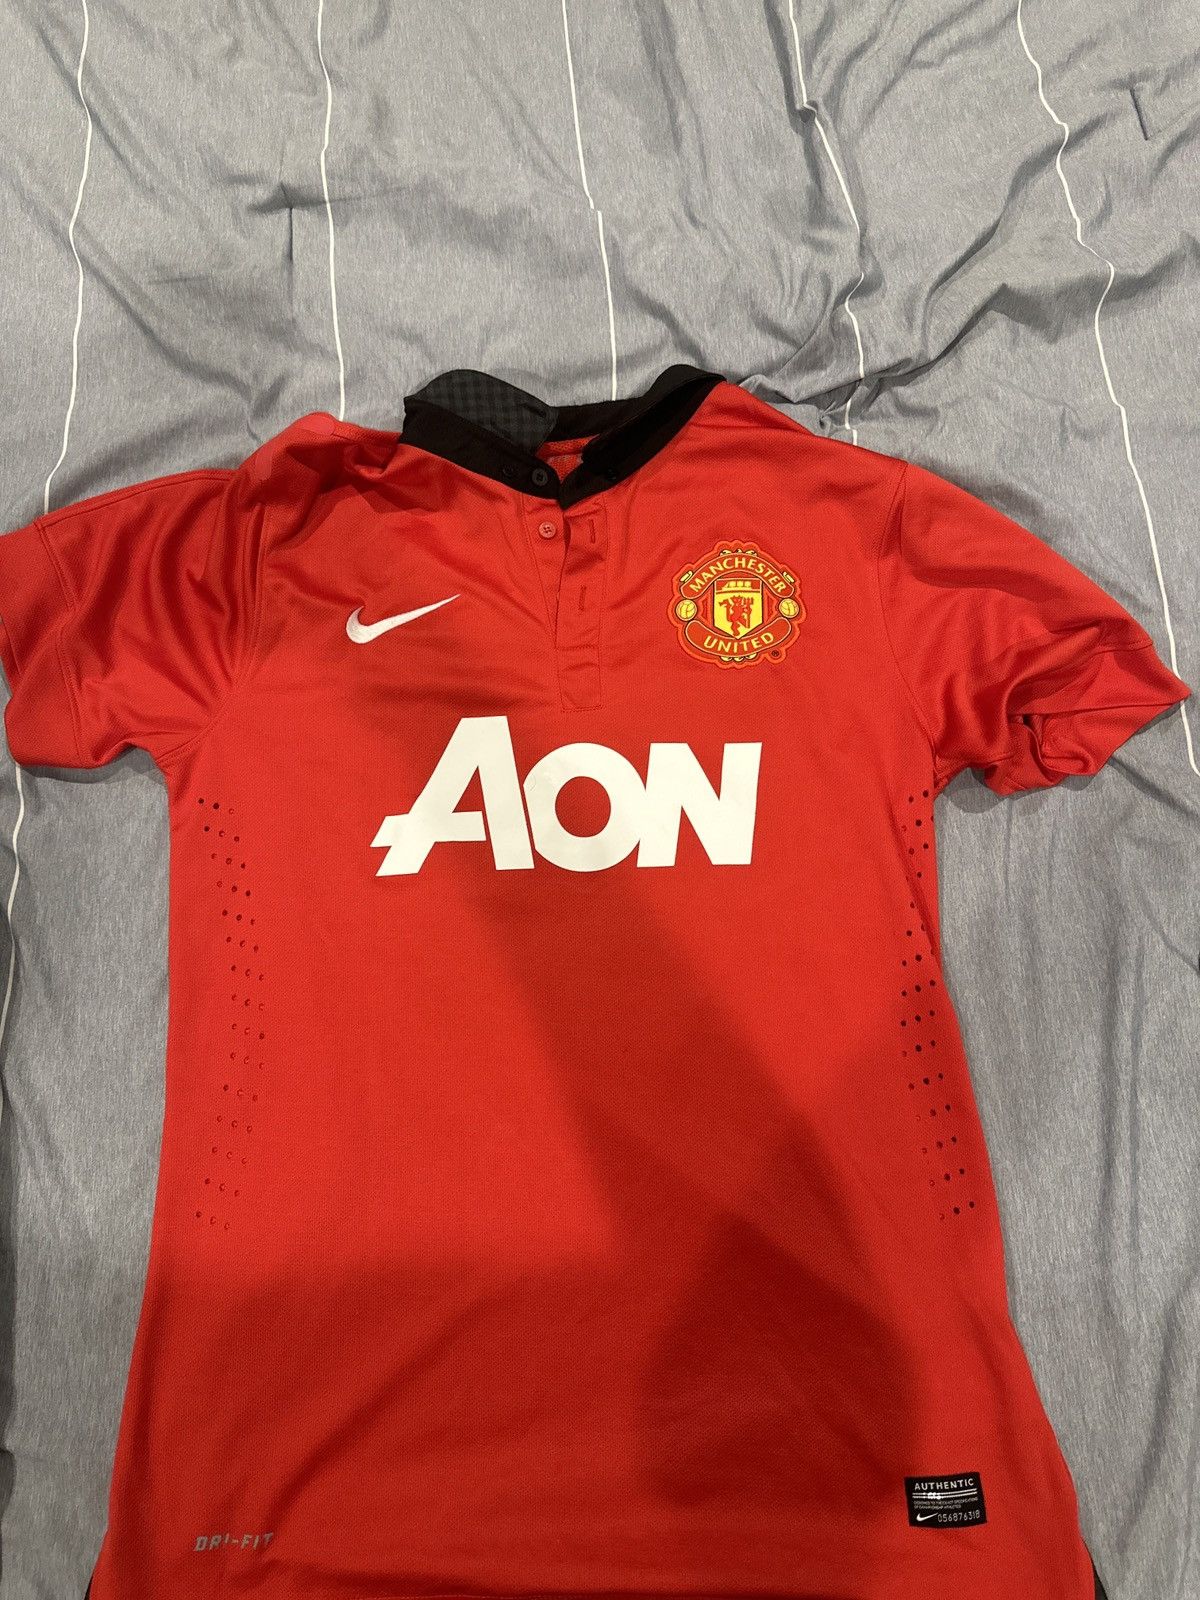 Nike Manchester United jersey Juan Mata #8(authentic) Size US S / EU 44-46 / 1 - 2 Preview